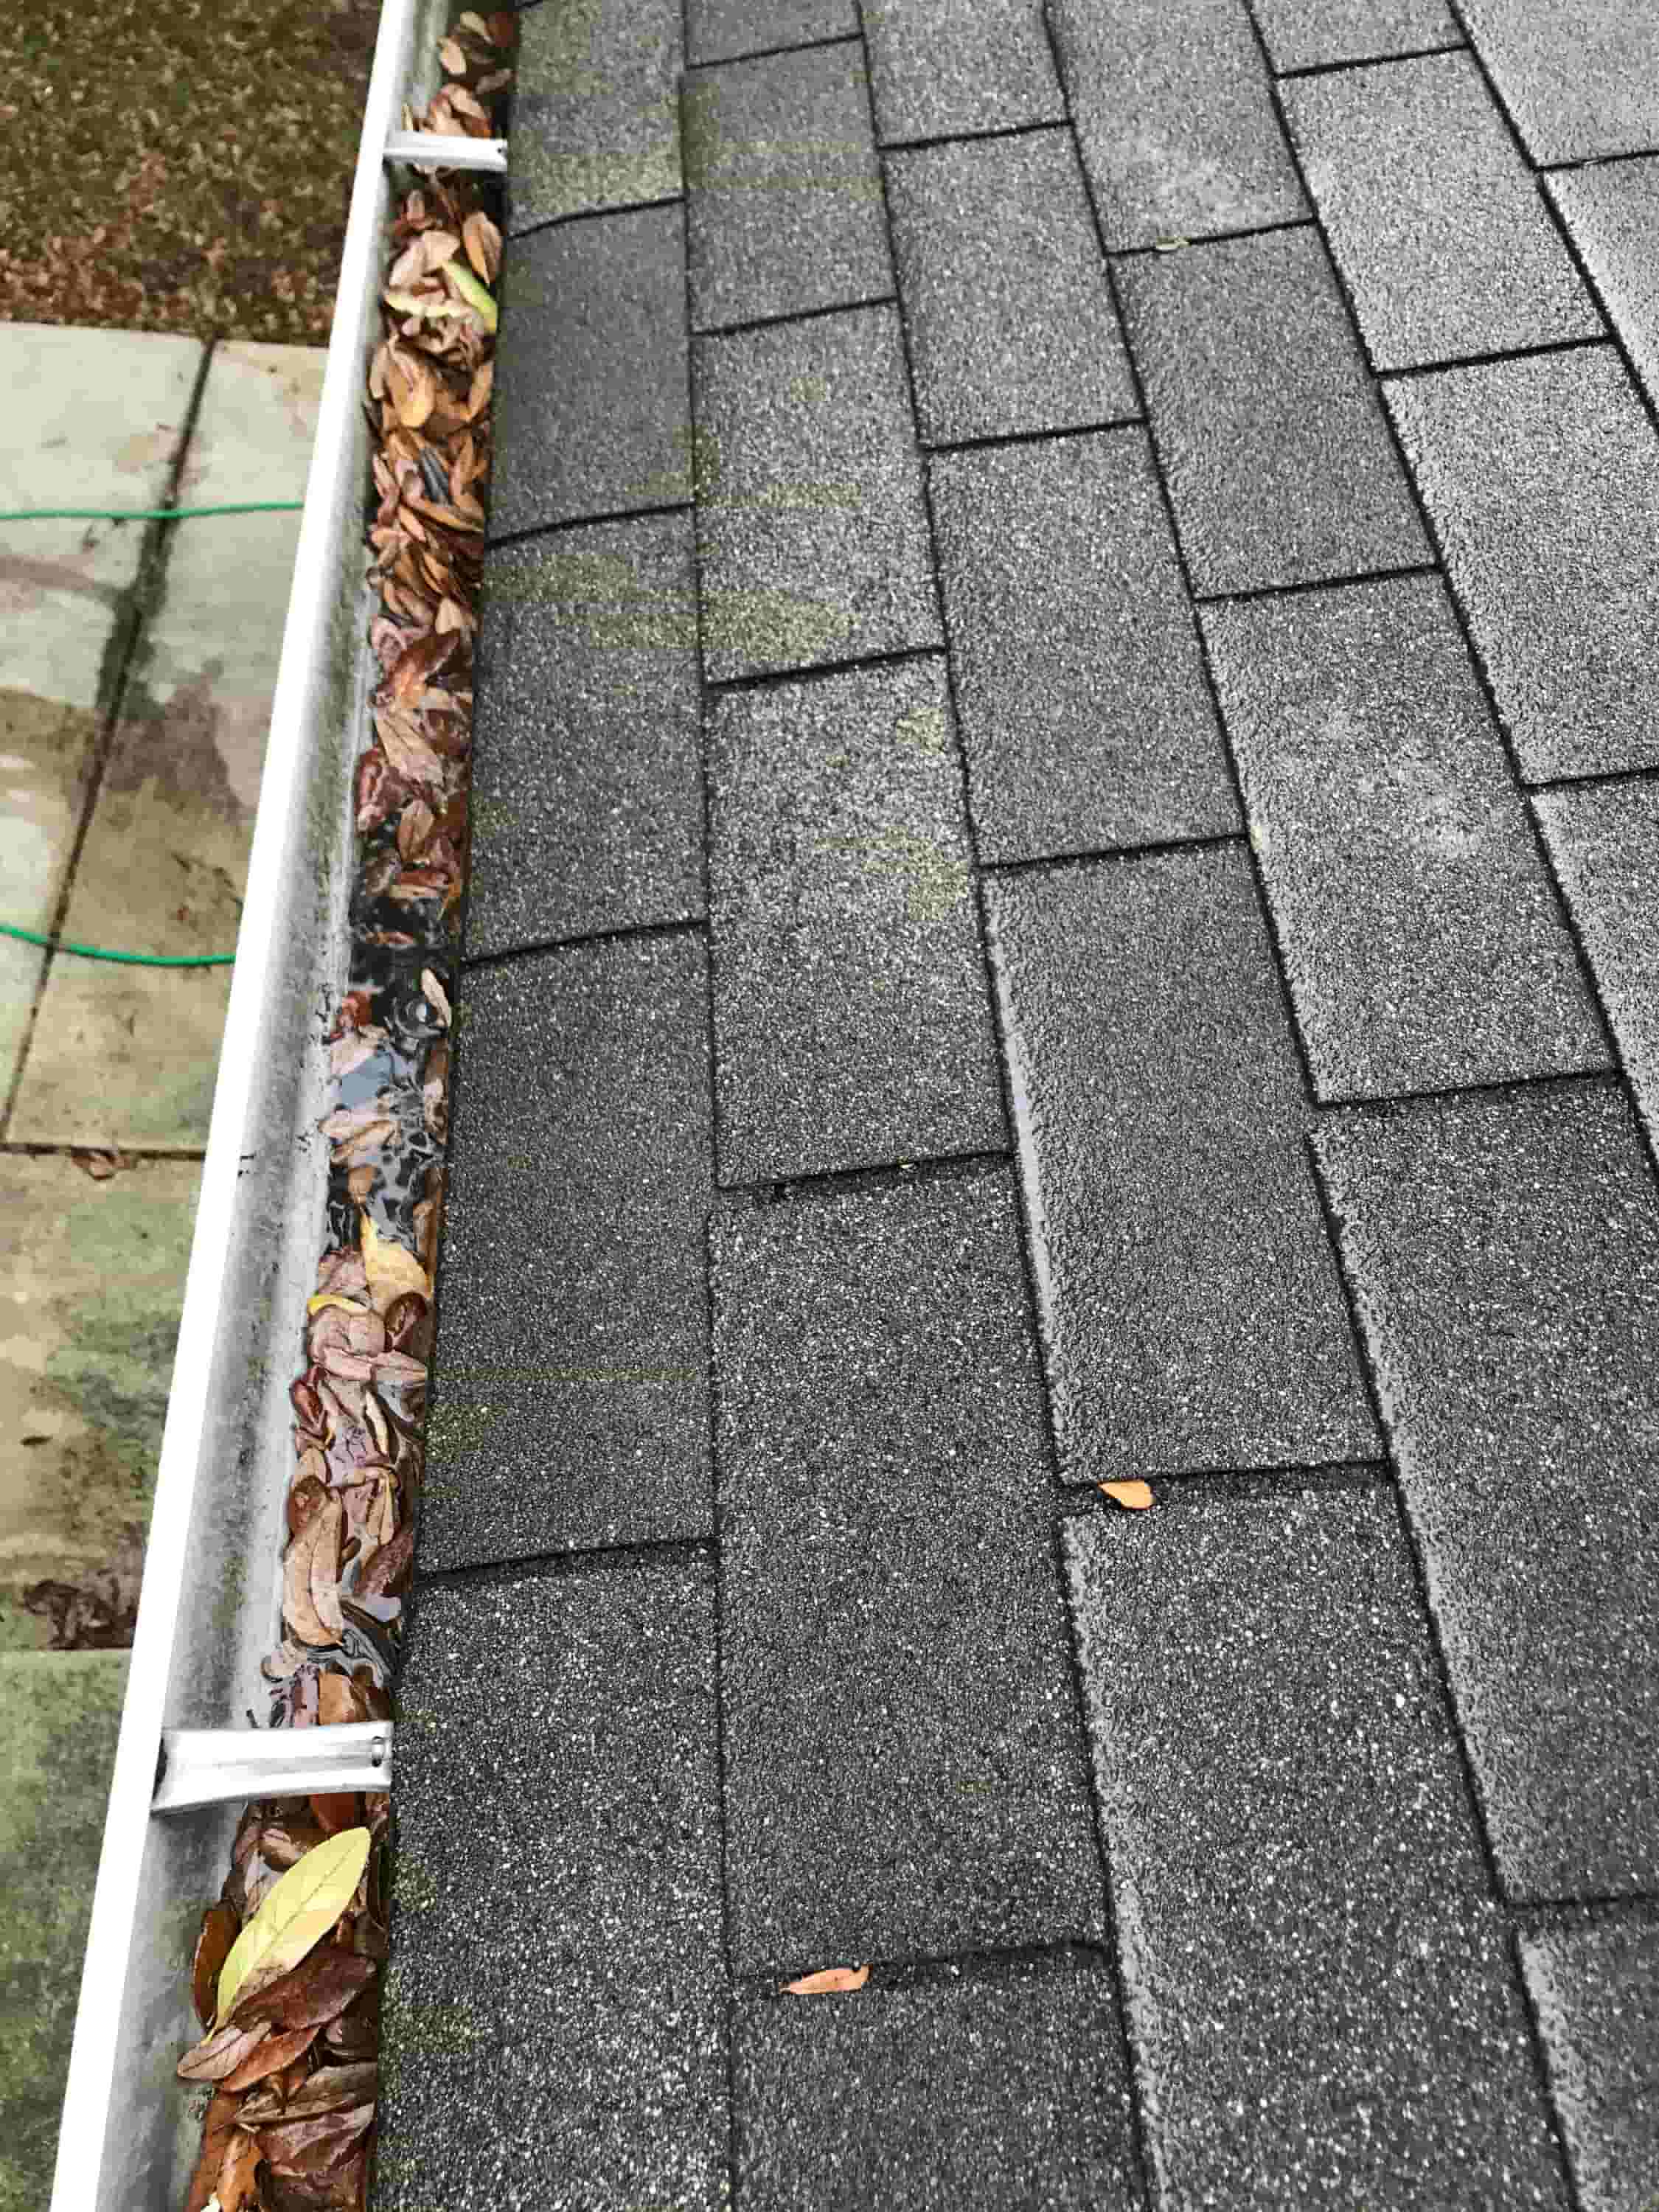 cleaning out downspouts